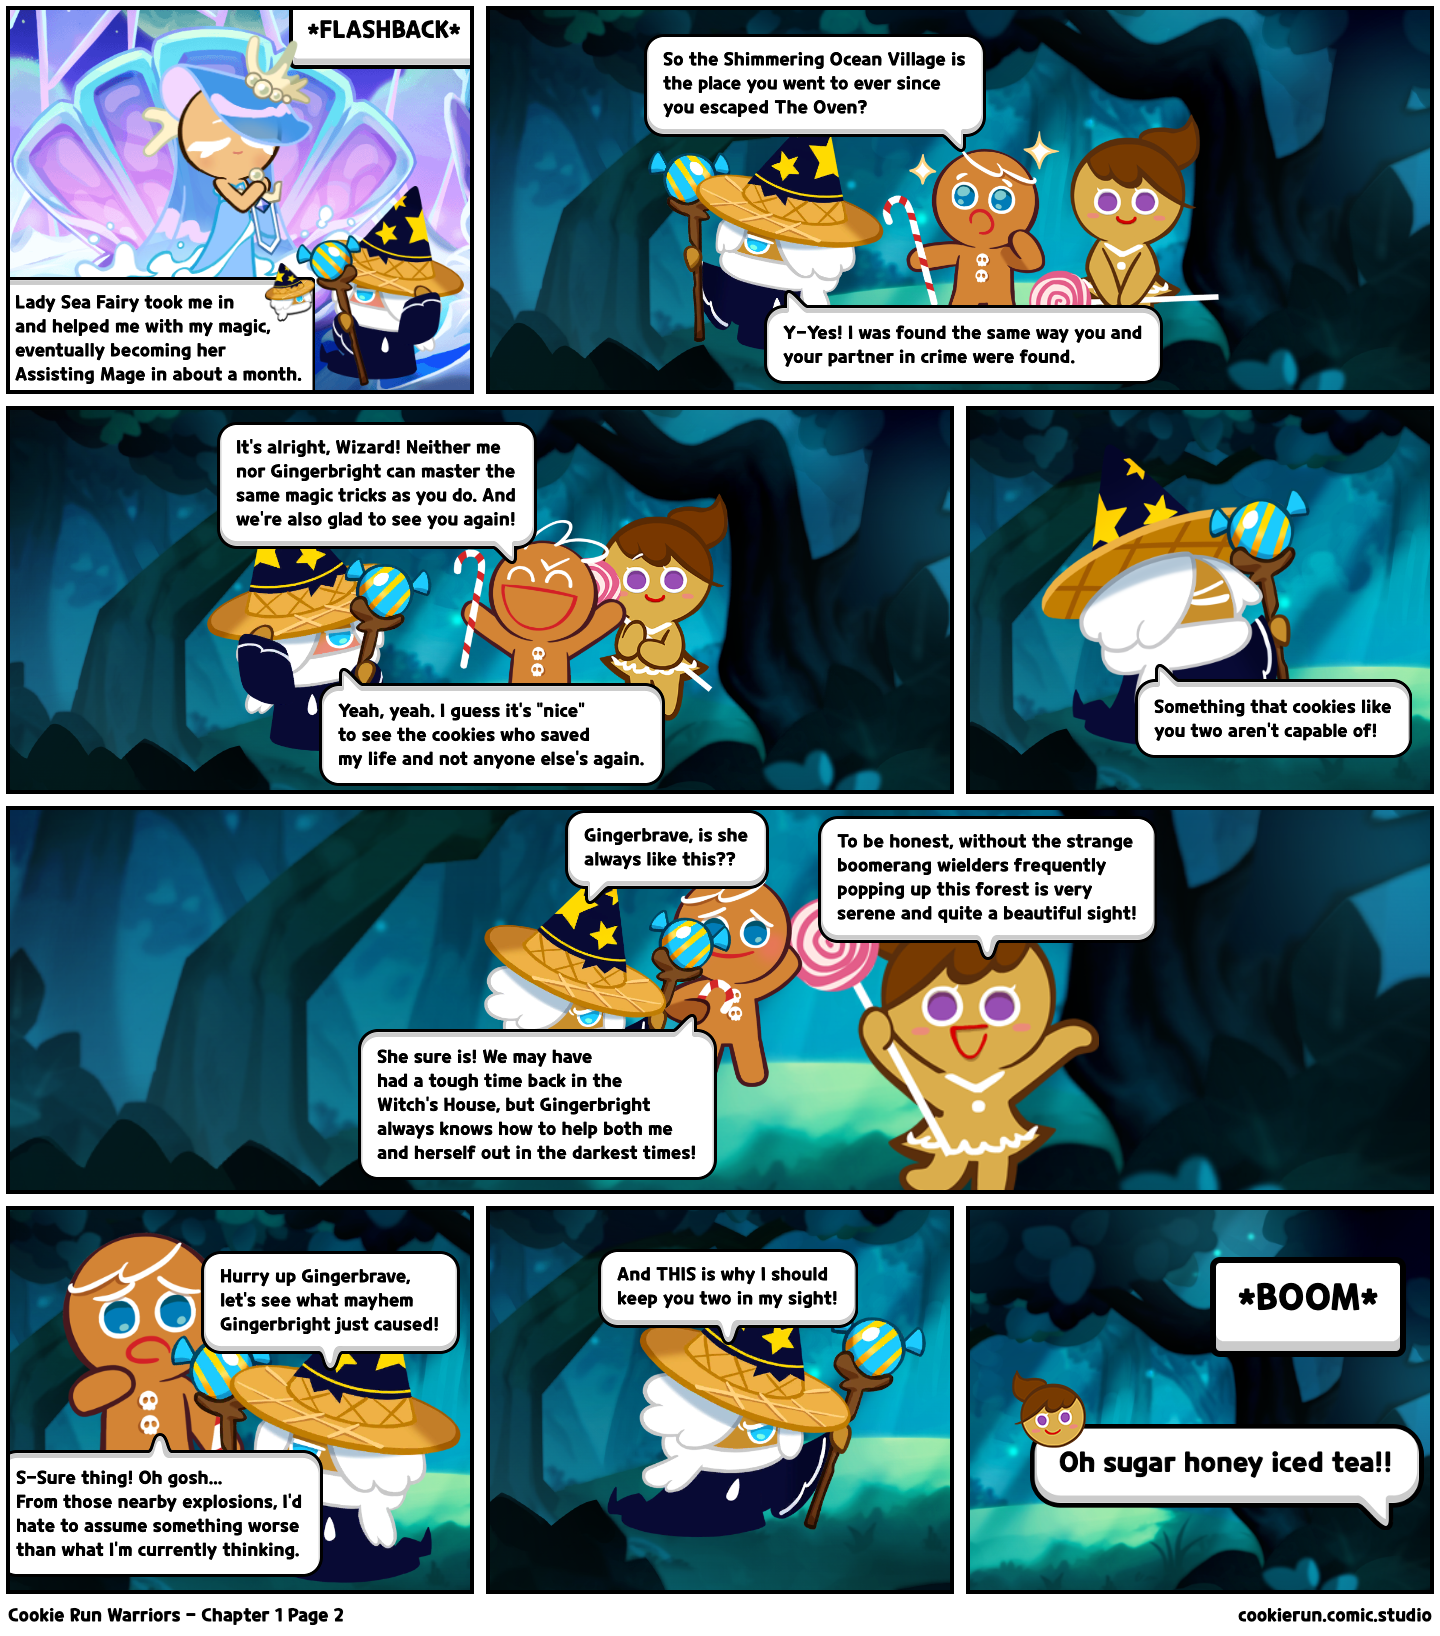 Cookie Run Warriors - Chapter 1 Page 2